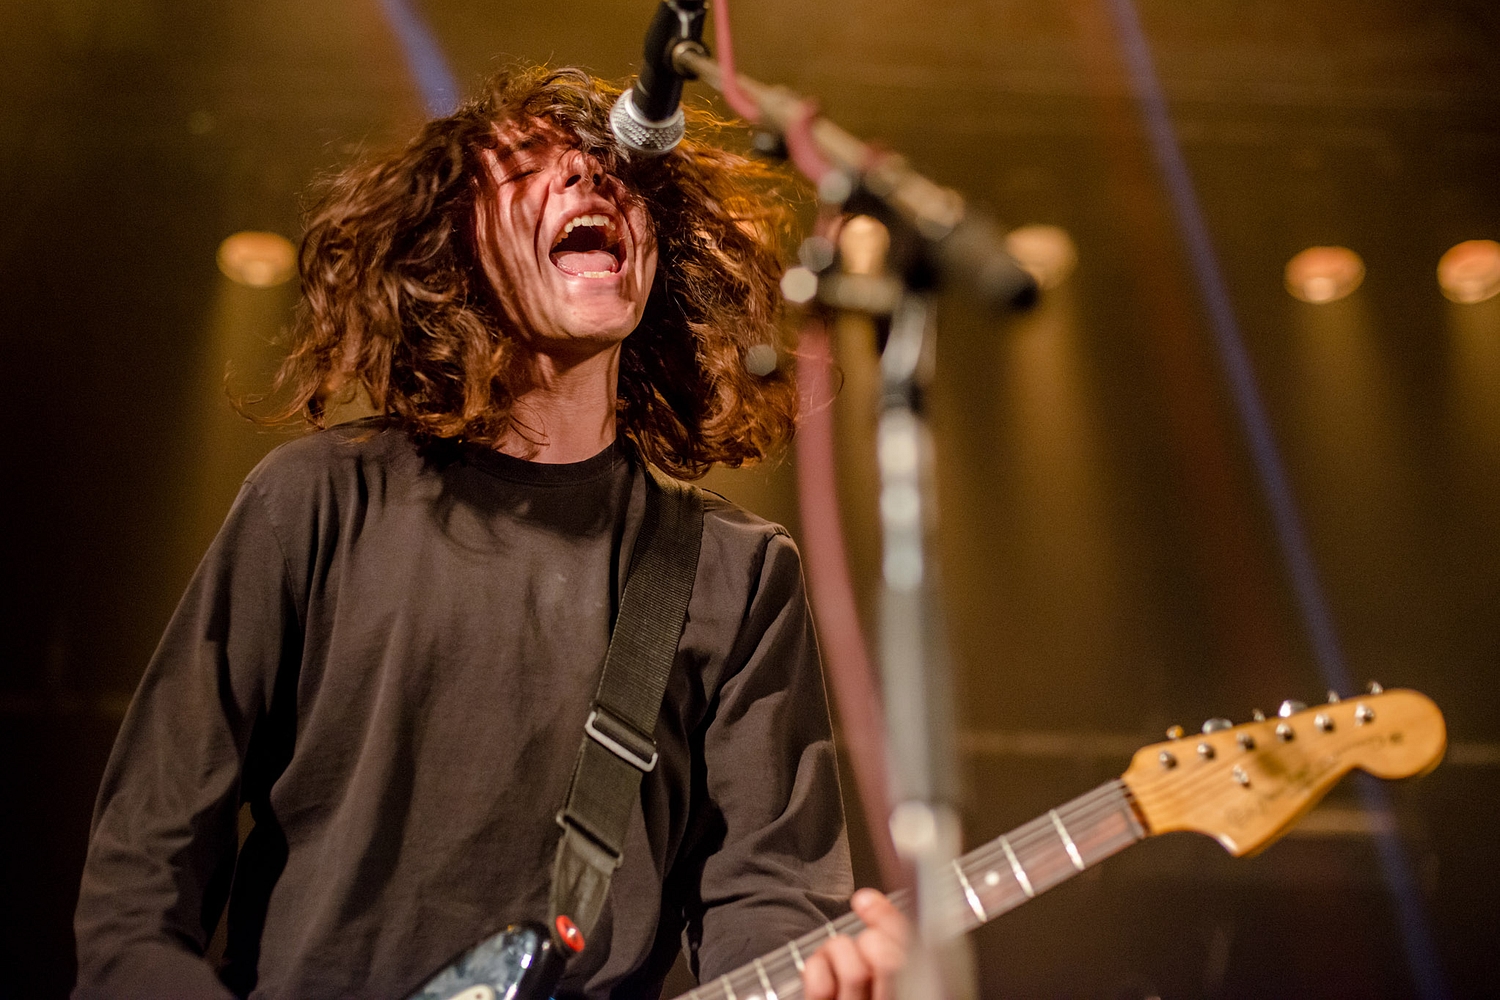 The Wytches announce tour, share video for ‘Bone Weary’